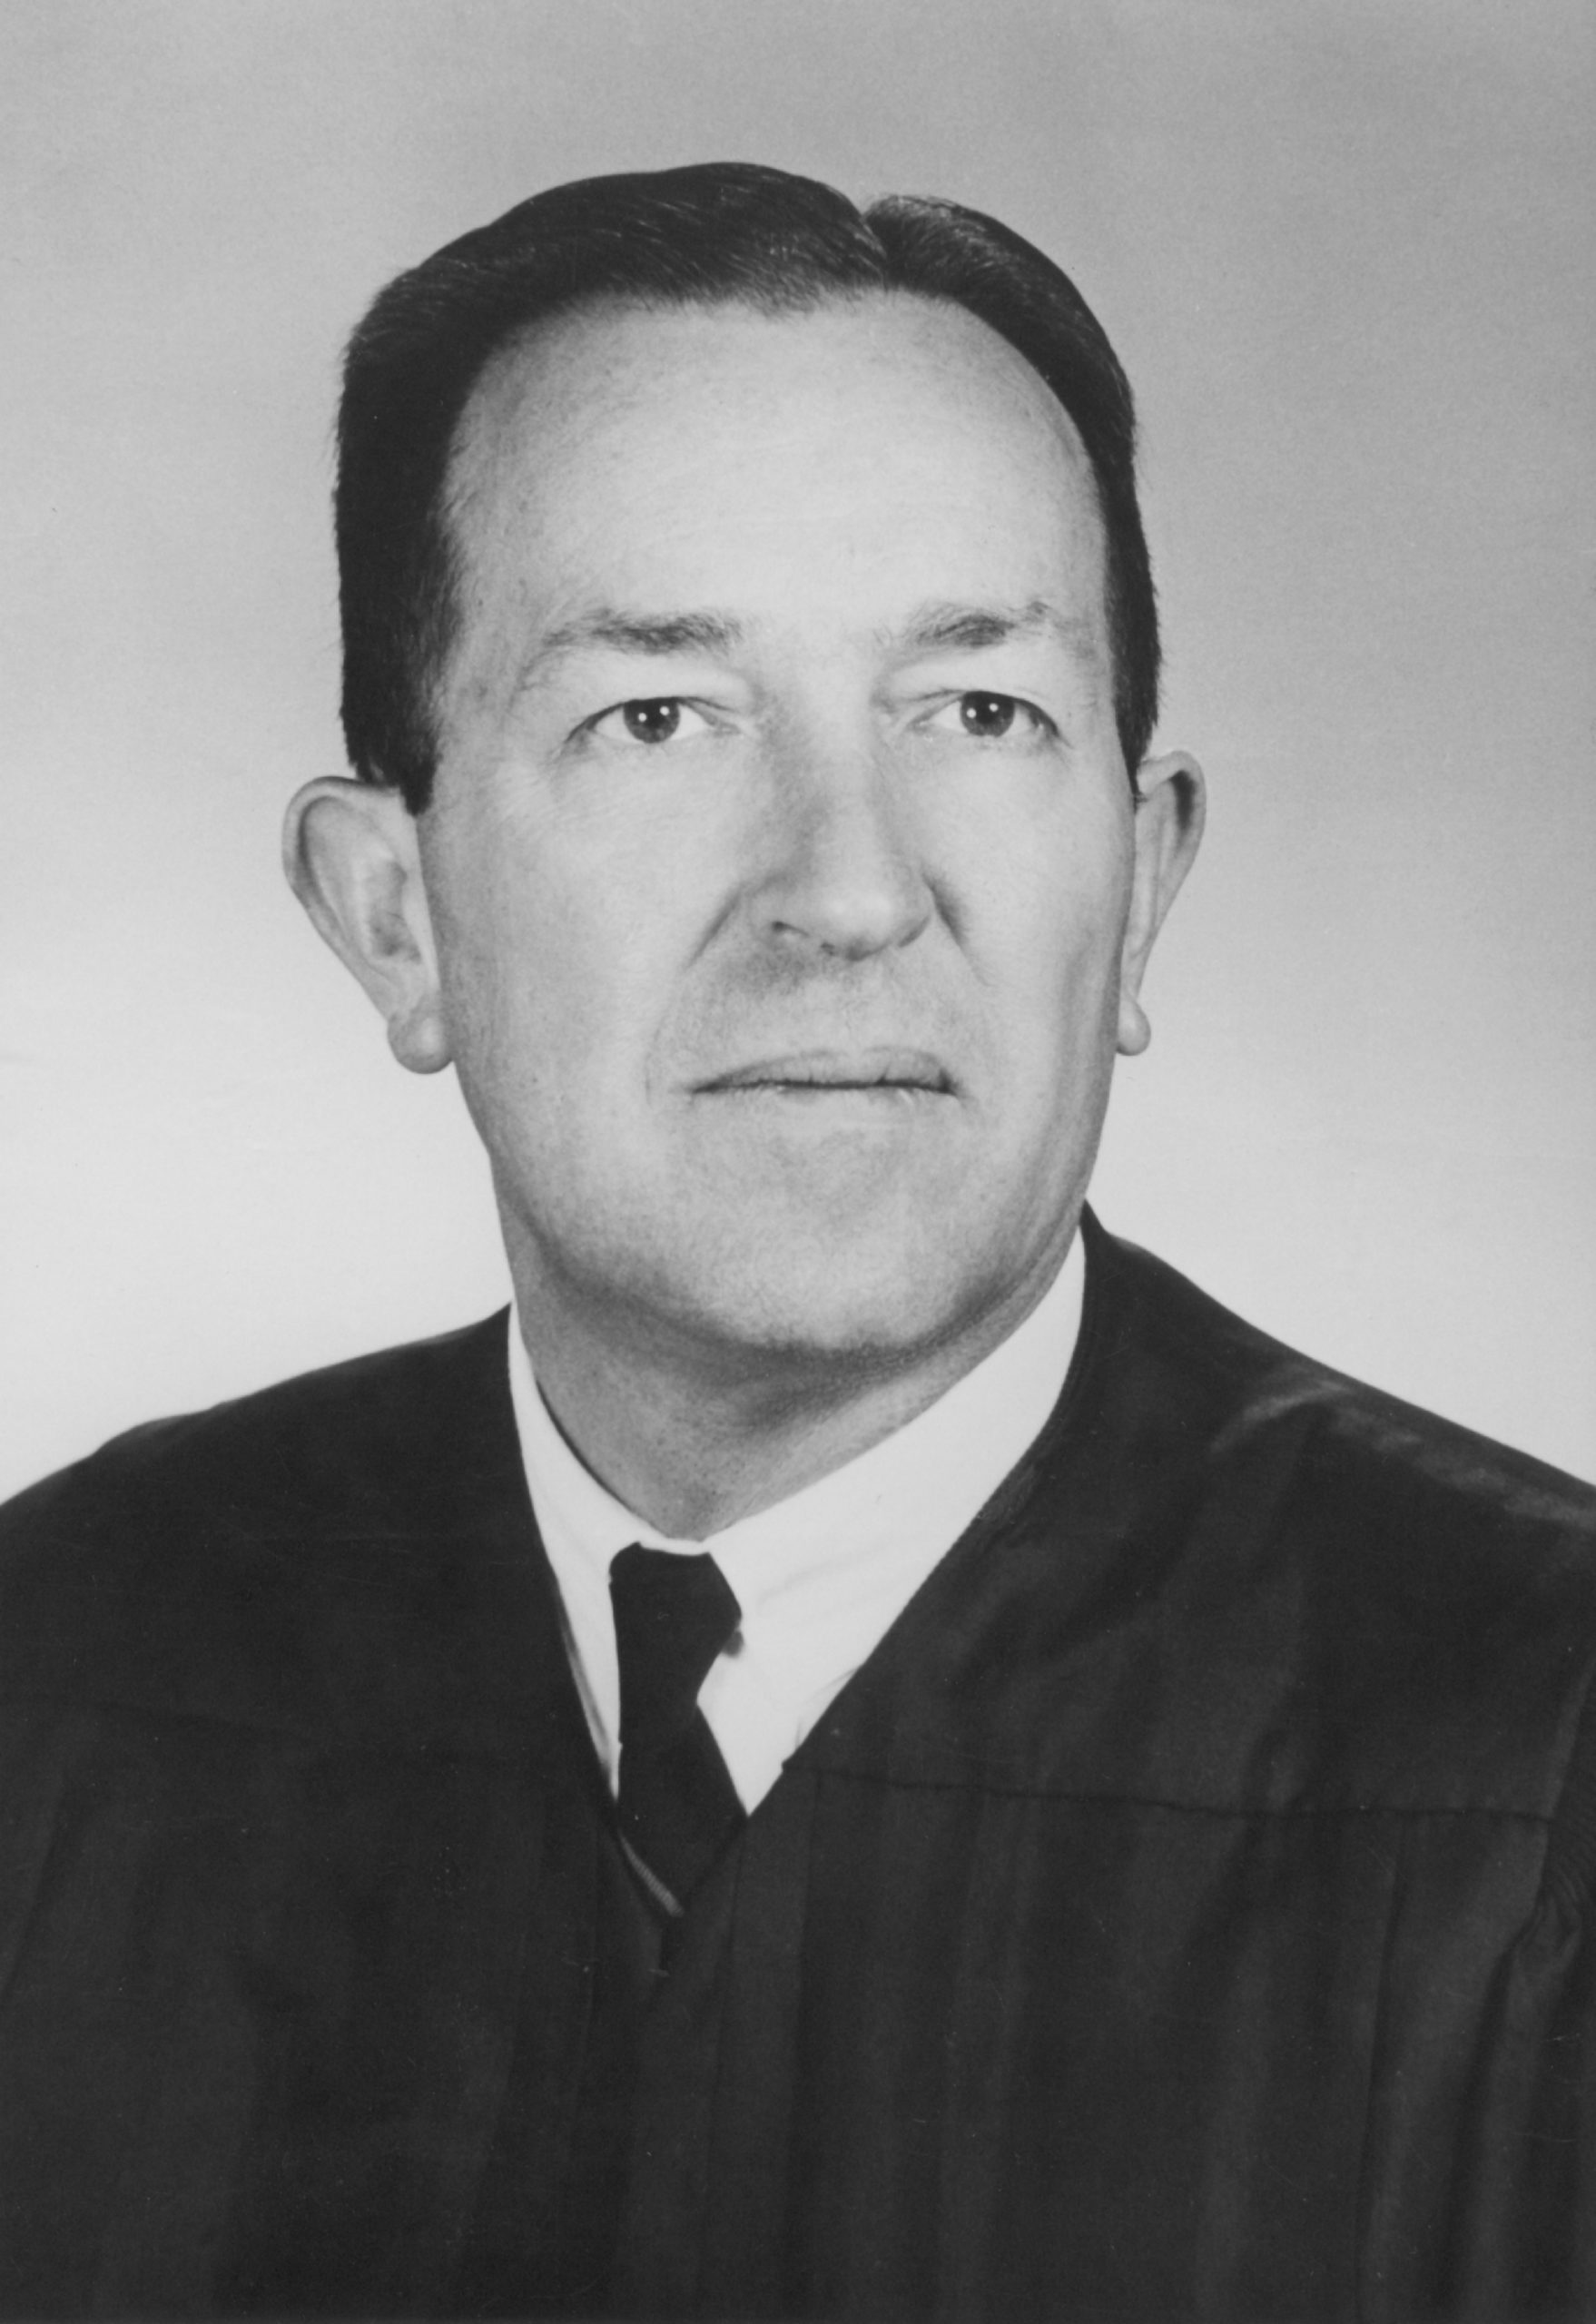 The Honorable Griffin B. Bell